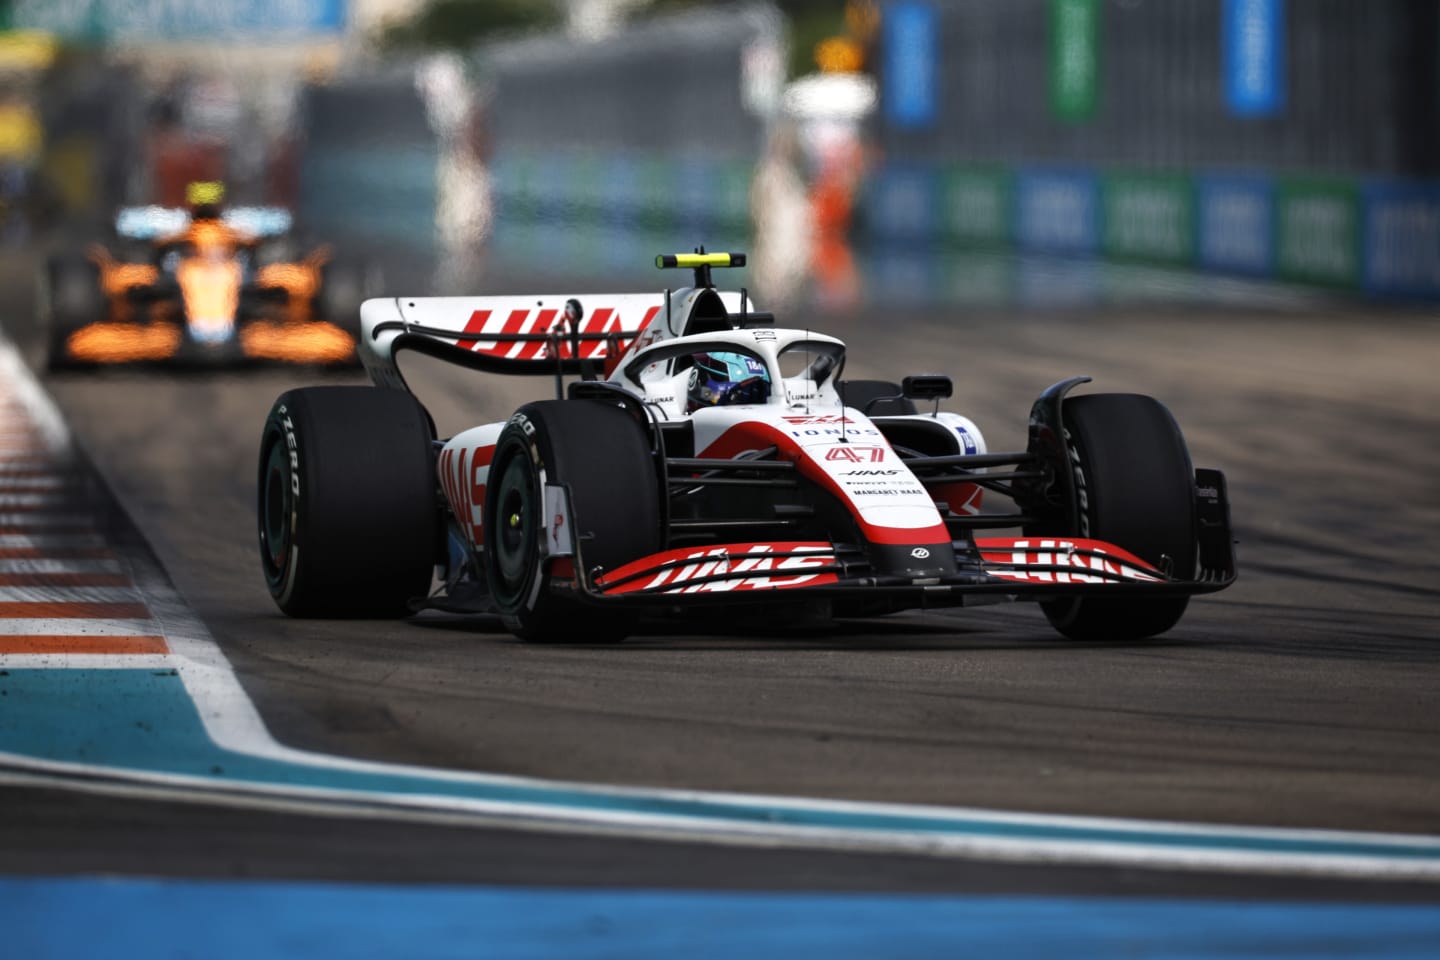 MIAMI, FLORIDA - MAY 08: Mick Schumacher of Germany driving the (47) Haas F1 VF-22 Ferrari on track during the F1 Grand Prix of Miami at the Miami International Autodrome on May 08, 2022 in Miami, Florida. (Photo by Chris Graythen/Getty Images)